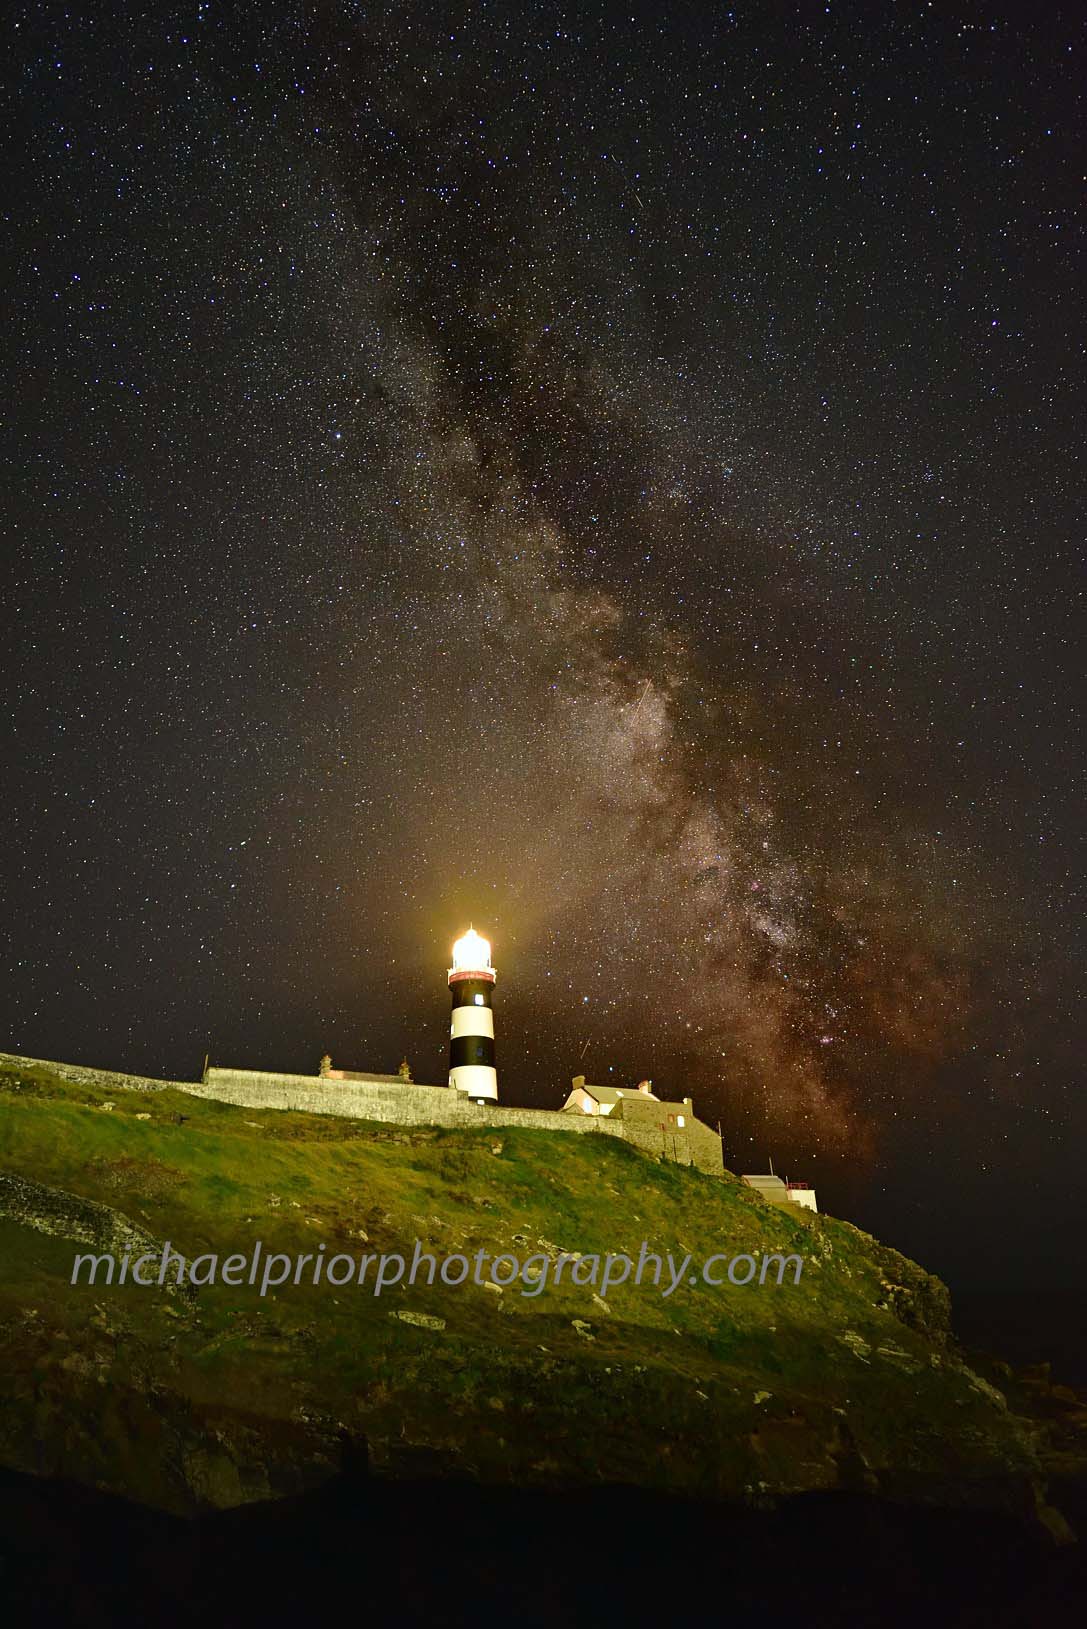 Looking Up At The Oldhead Lighthouse And The Milkyway - Michael Prior Photography 